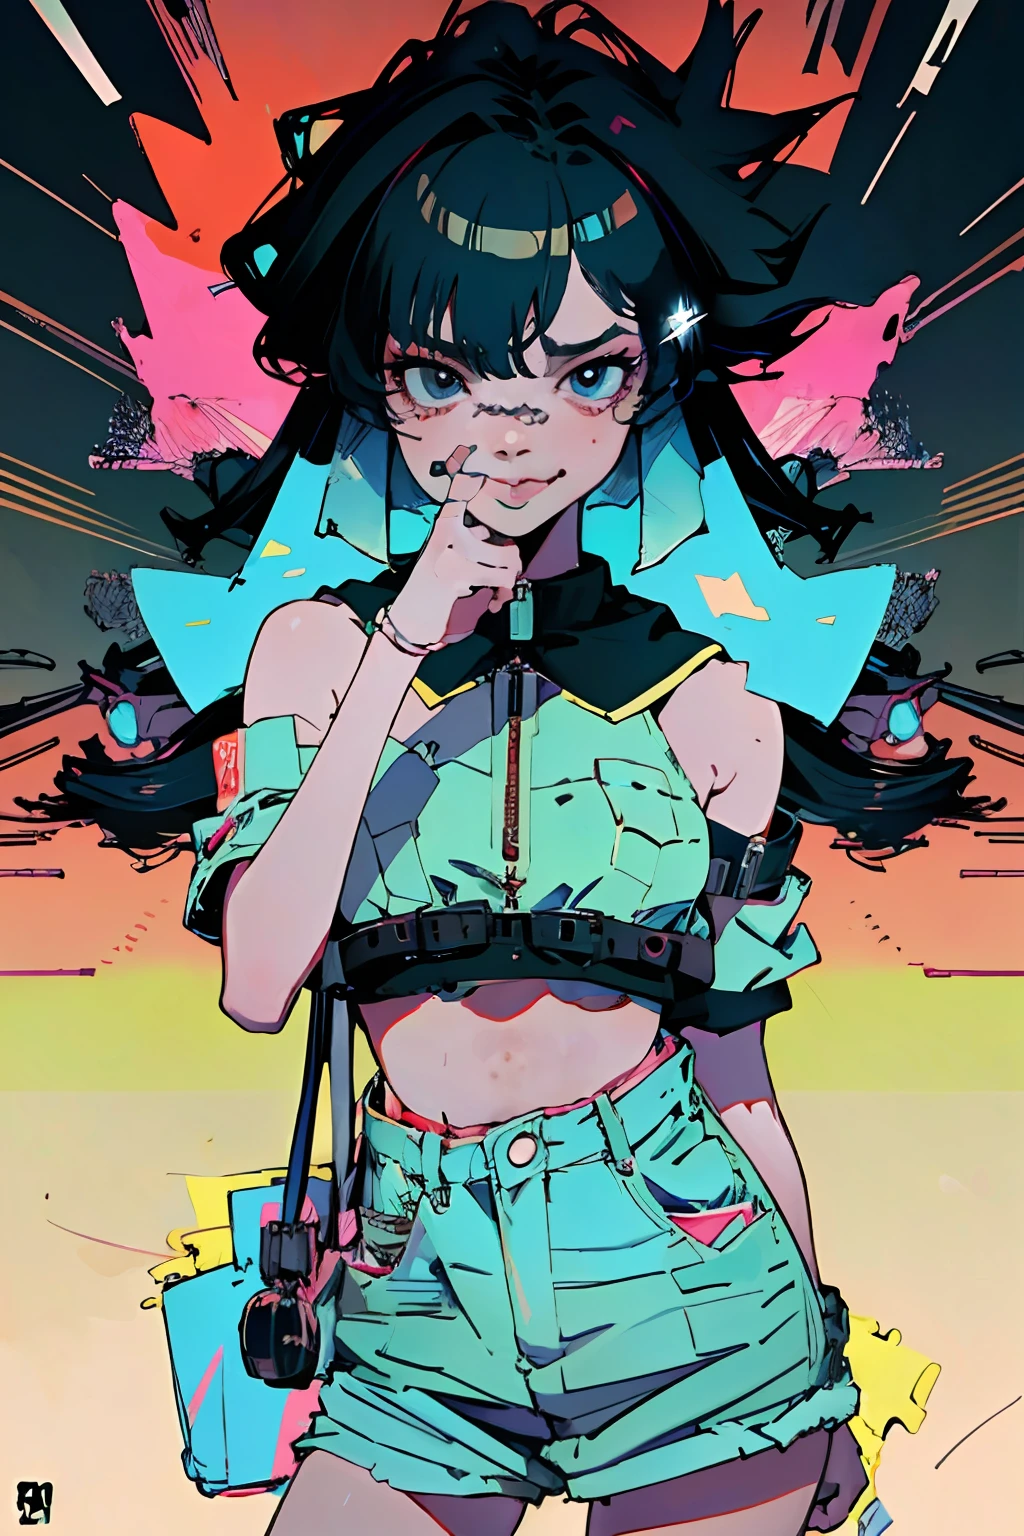 "In an urban high school, a girl stands out in vivid pop-art style amidst monotone academia. Clad in edgy, modern fashion, her hair a cascade of neon colors, she holds an art book and a highlighter, a smirk on her face hiding an intense, emotional depth. She is the embodiment of rebellion and passion. The backdrop contrasts between the soft twilight cityscape and the harsh indoor fluorescent lights, mirroring her vibrant inner world against the grayscale reality. The piece melds ultra-high-definition realism with abstract neon pop-art, presenting a stylish narrative of self-expression in a world often too subdued for her bold spirit."